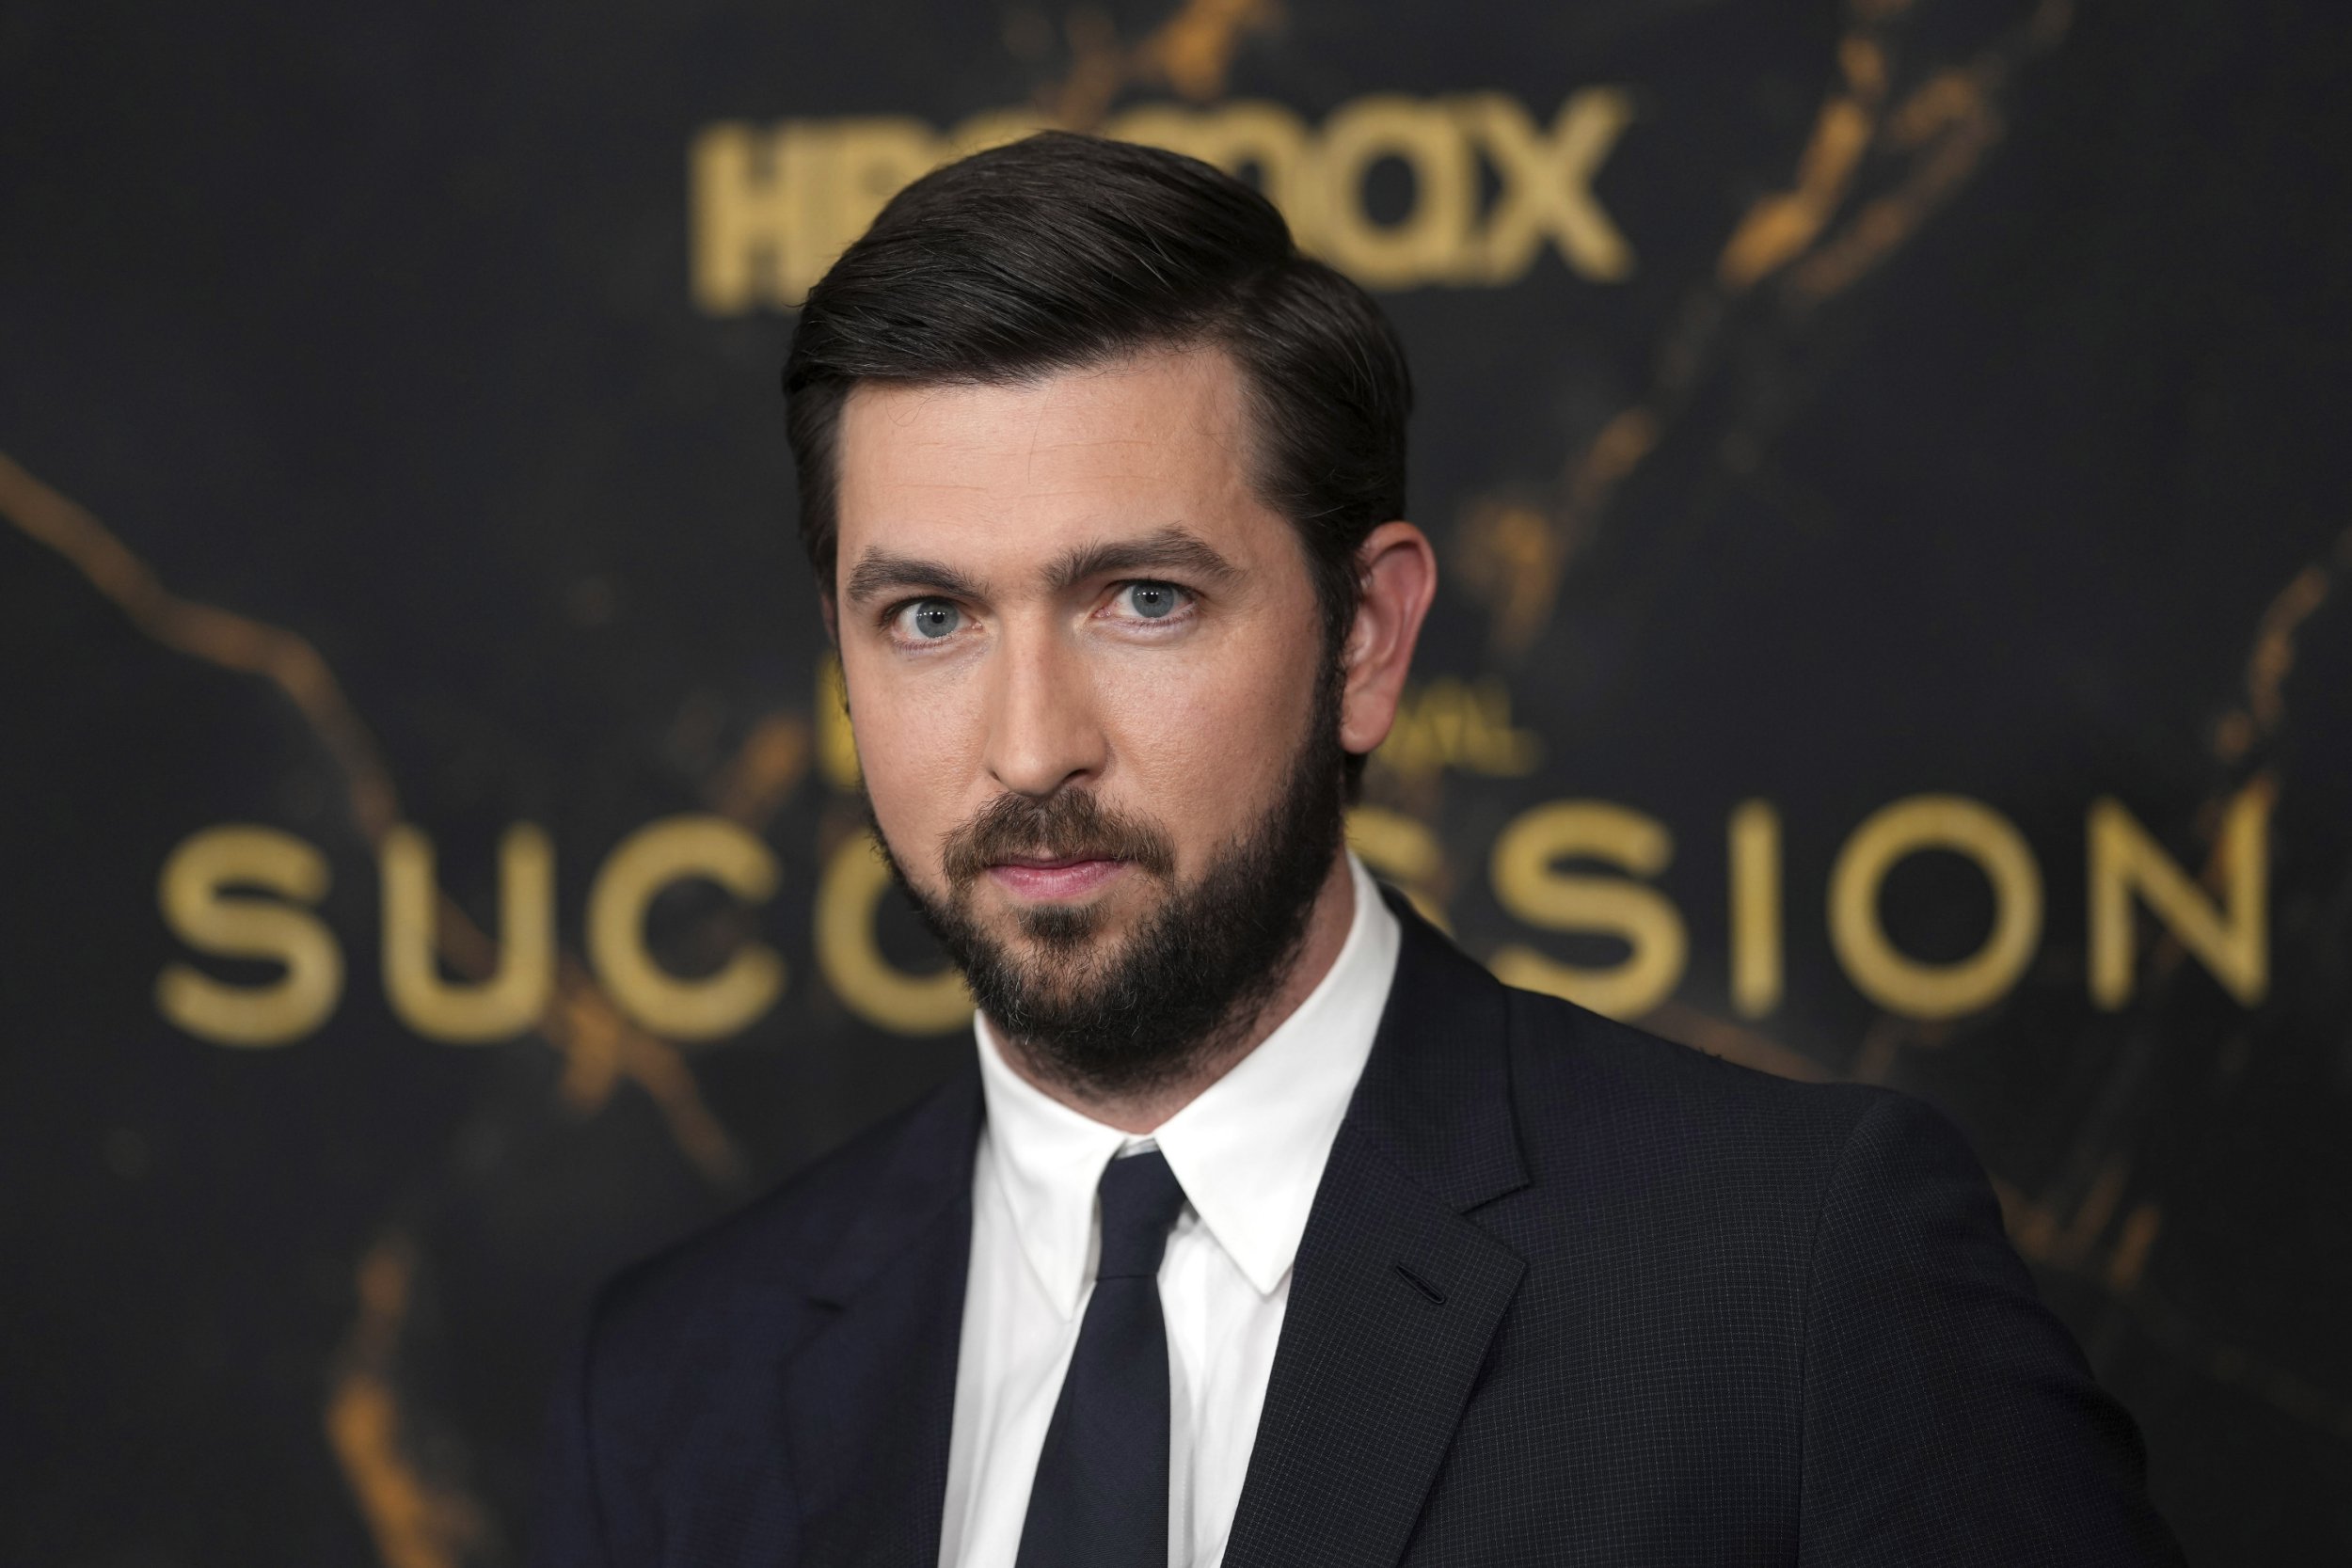 Who is Succession star Nicholas Braun and how tall is he? The US Sun